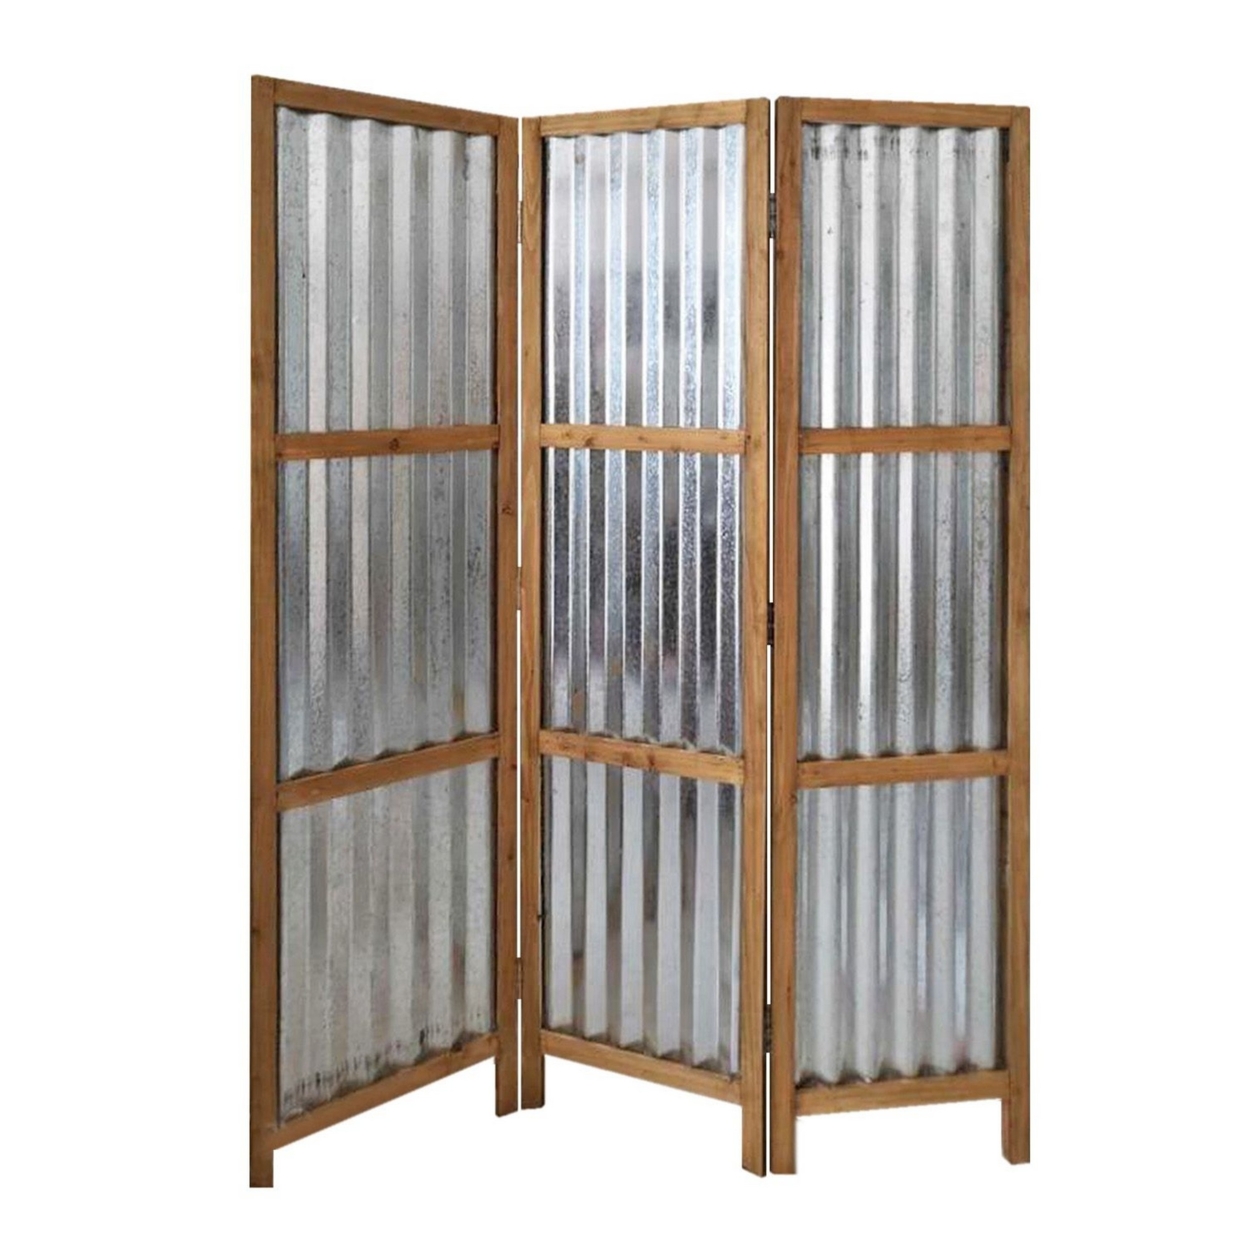 Industrial 3 Panel Foldable Screen With Corrugated Design,Silver And Brown- Saltoro Sherpi